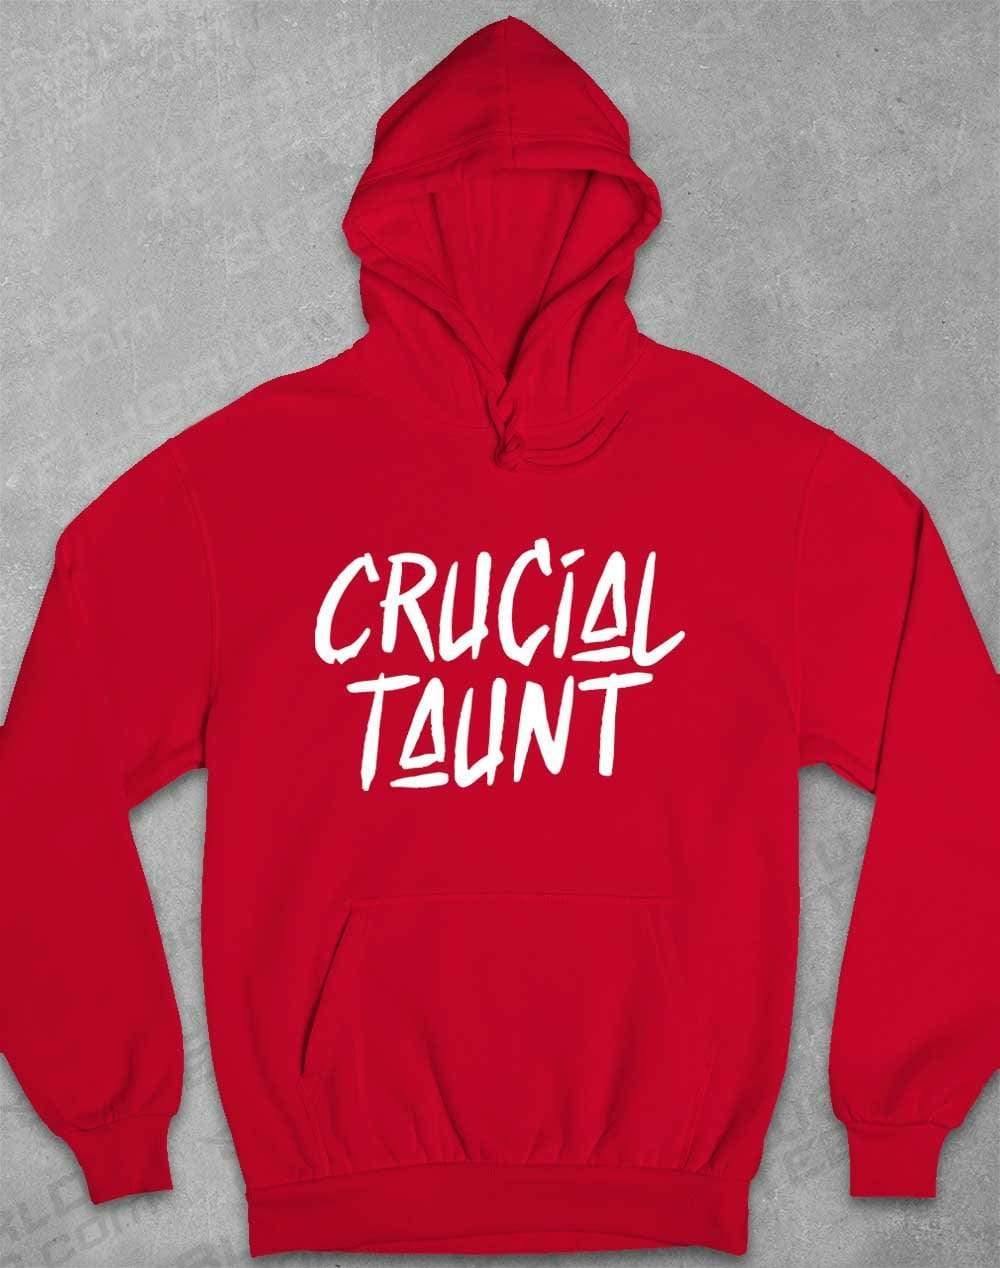 Crucial Taunt Hoodie XS / Fire Red  - Off World Tees